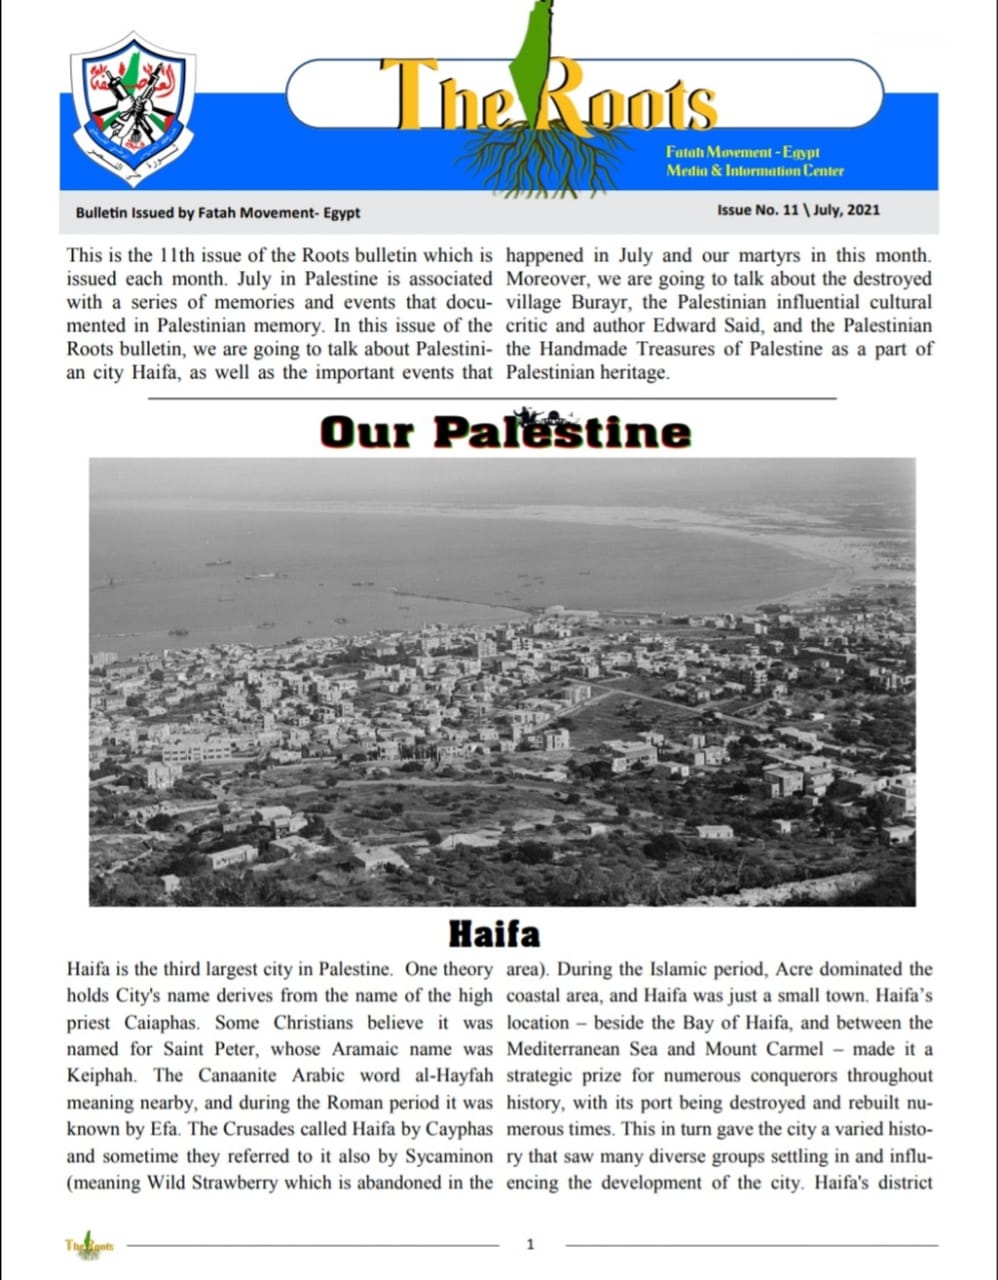 The Roots Bulletin (Issue No.11)